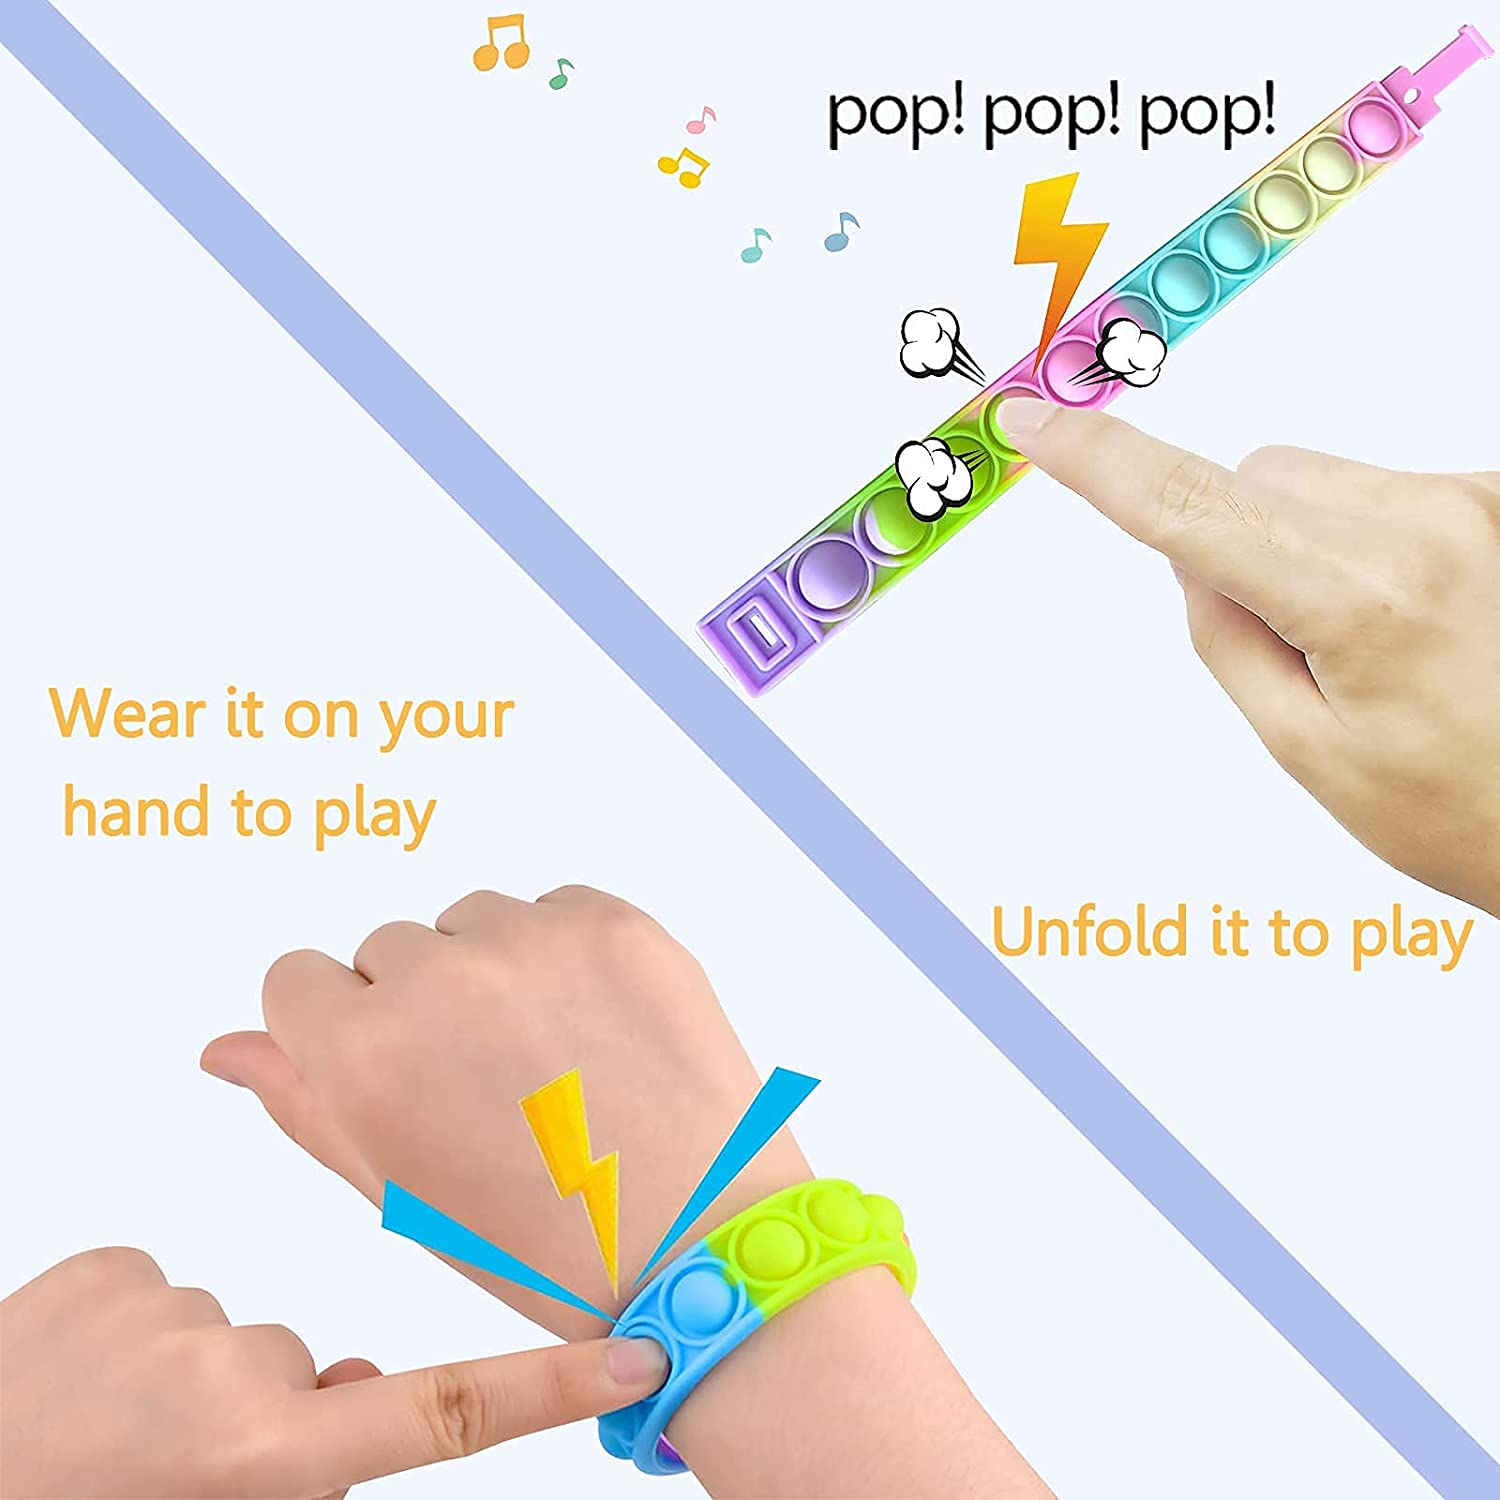 How To Play With Wrist Band Pop Toy